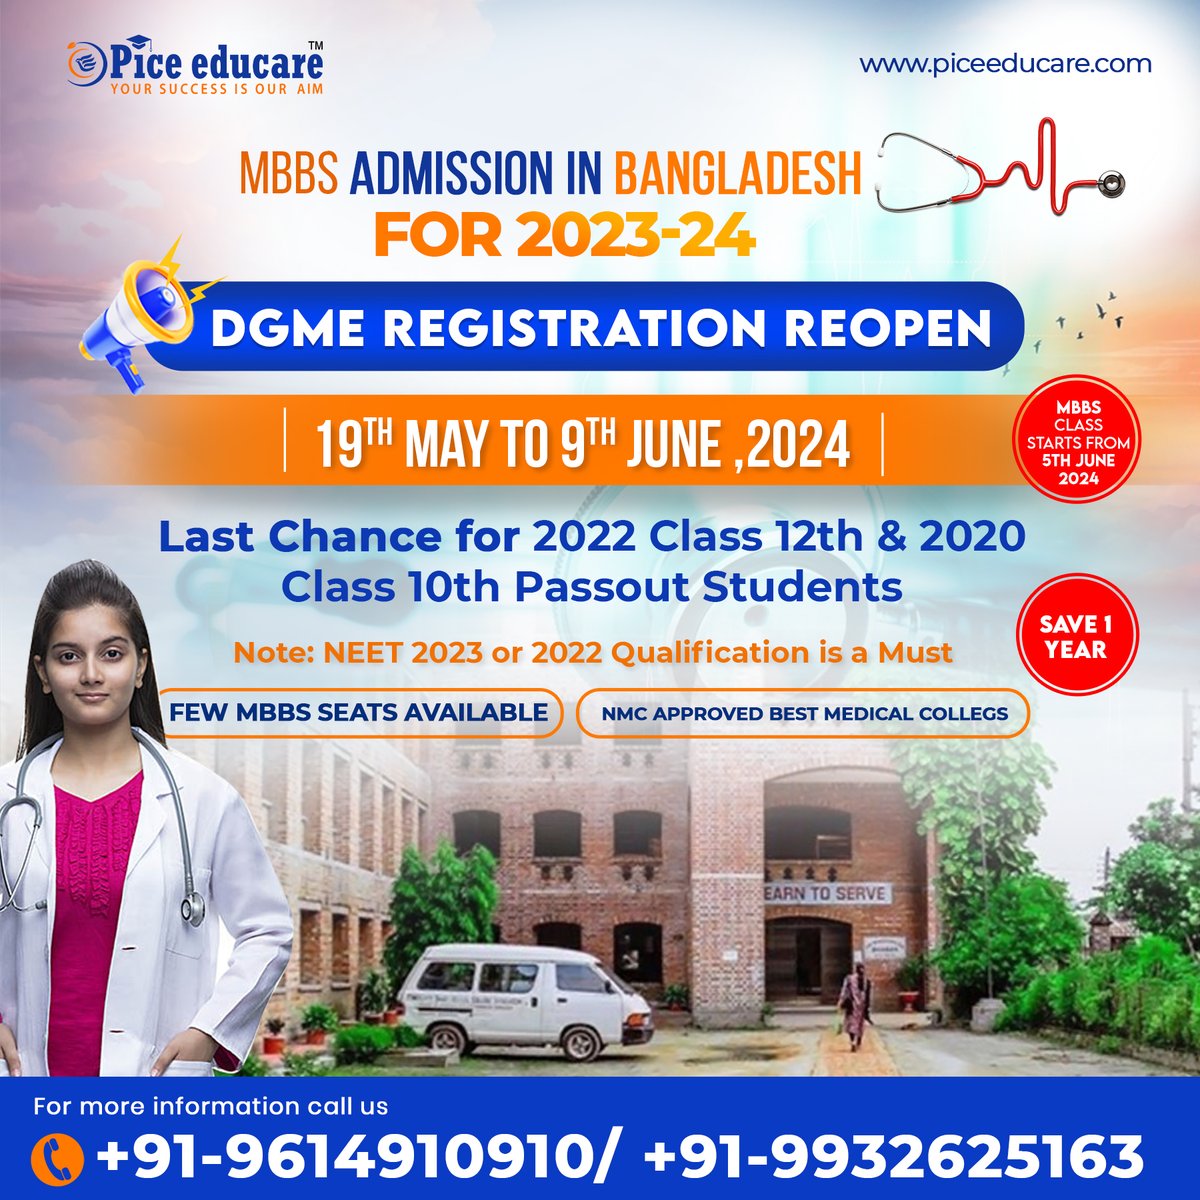 Bangladesh MBBS Admission DGME portal reopened for the 2023-24 session Don't miss this opportunity Admission Enquiry: +91 9614910910 Helpline no- 9932625163 . . . #mbbsinbangladesh #mbbsabroad #studymbbsabroad #mbbseligibility #MBBSFees #mbbsfeesbangladesh #mbbs #piceeducare